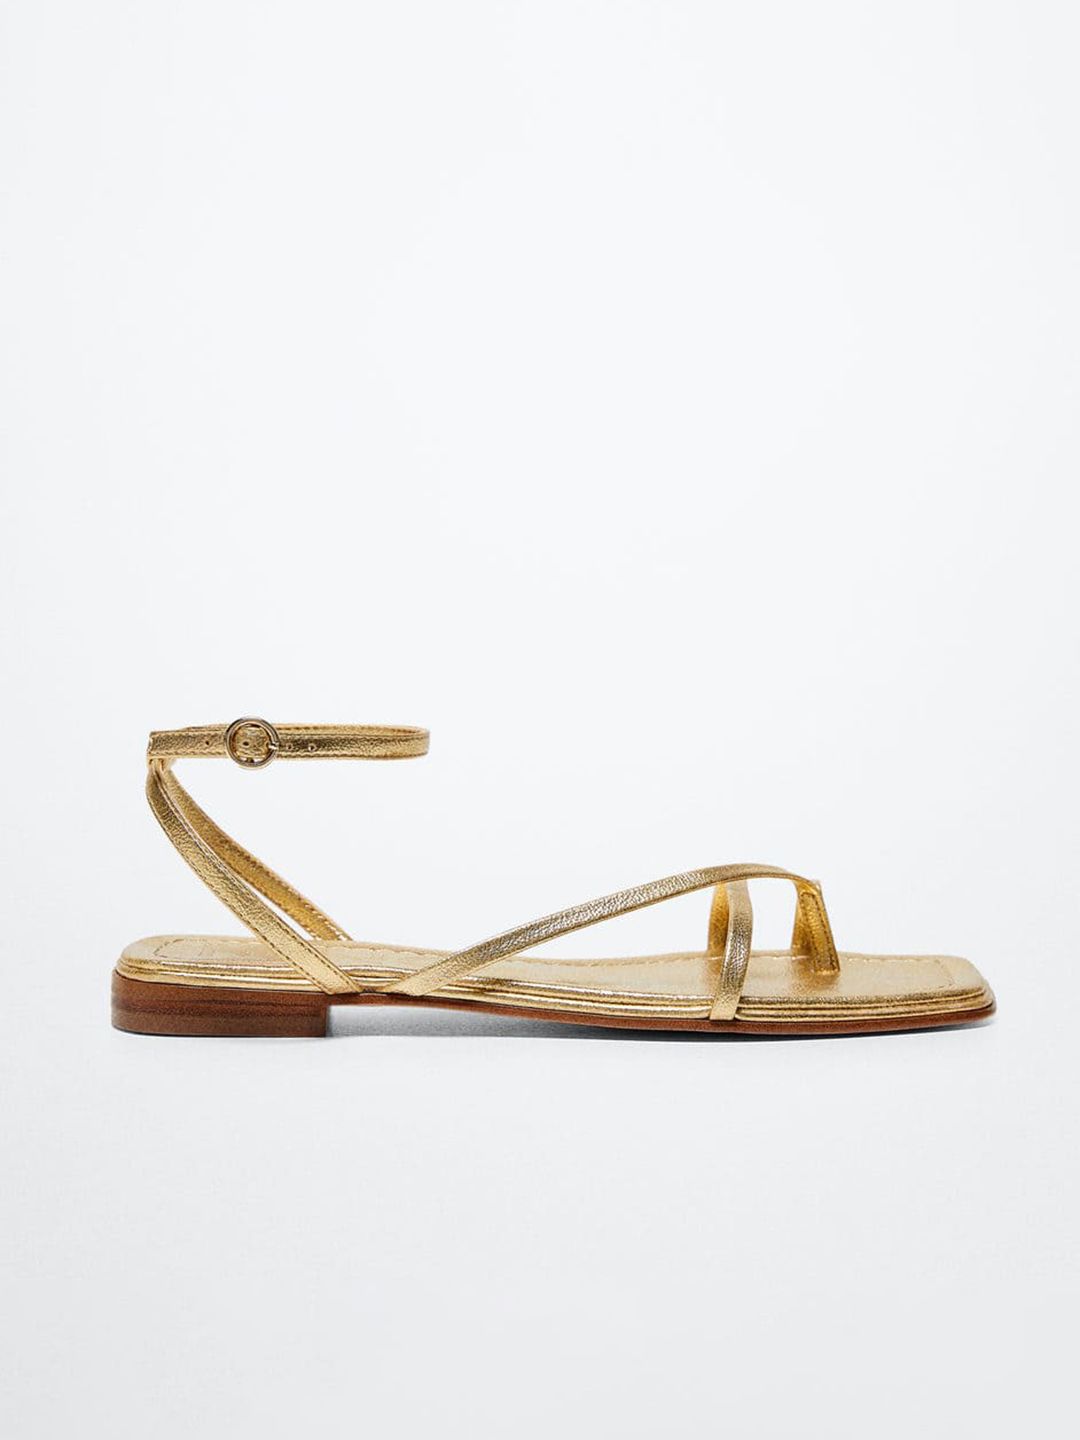 MANGO Women Solid Gold-Toned One Toe Flats Price in India